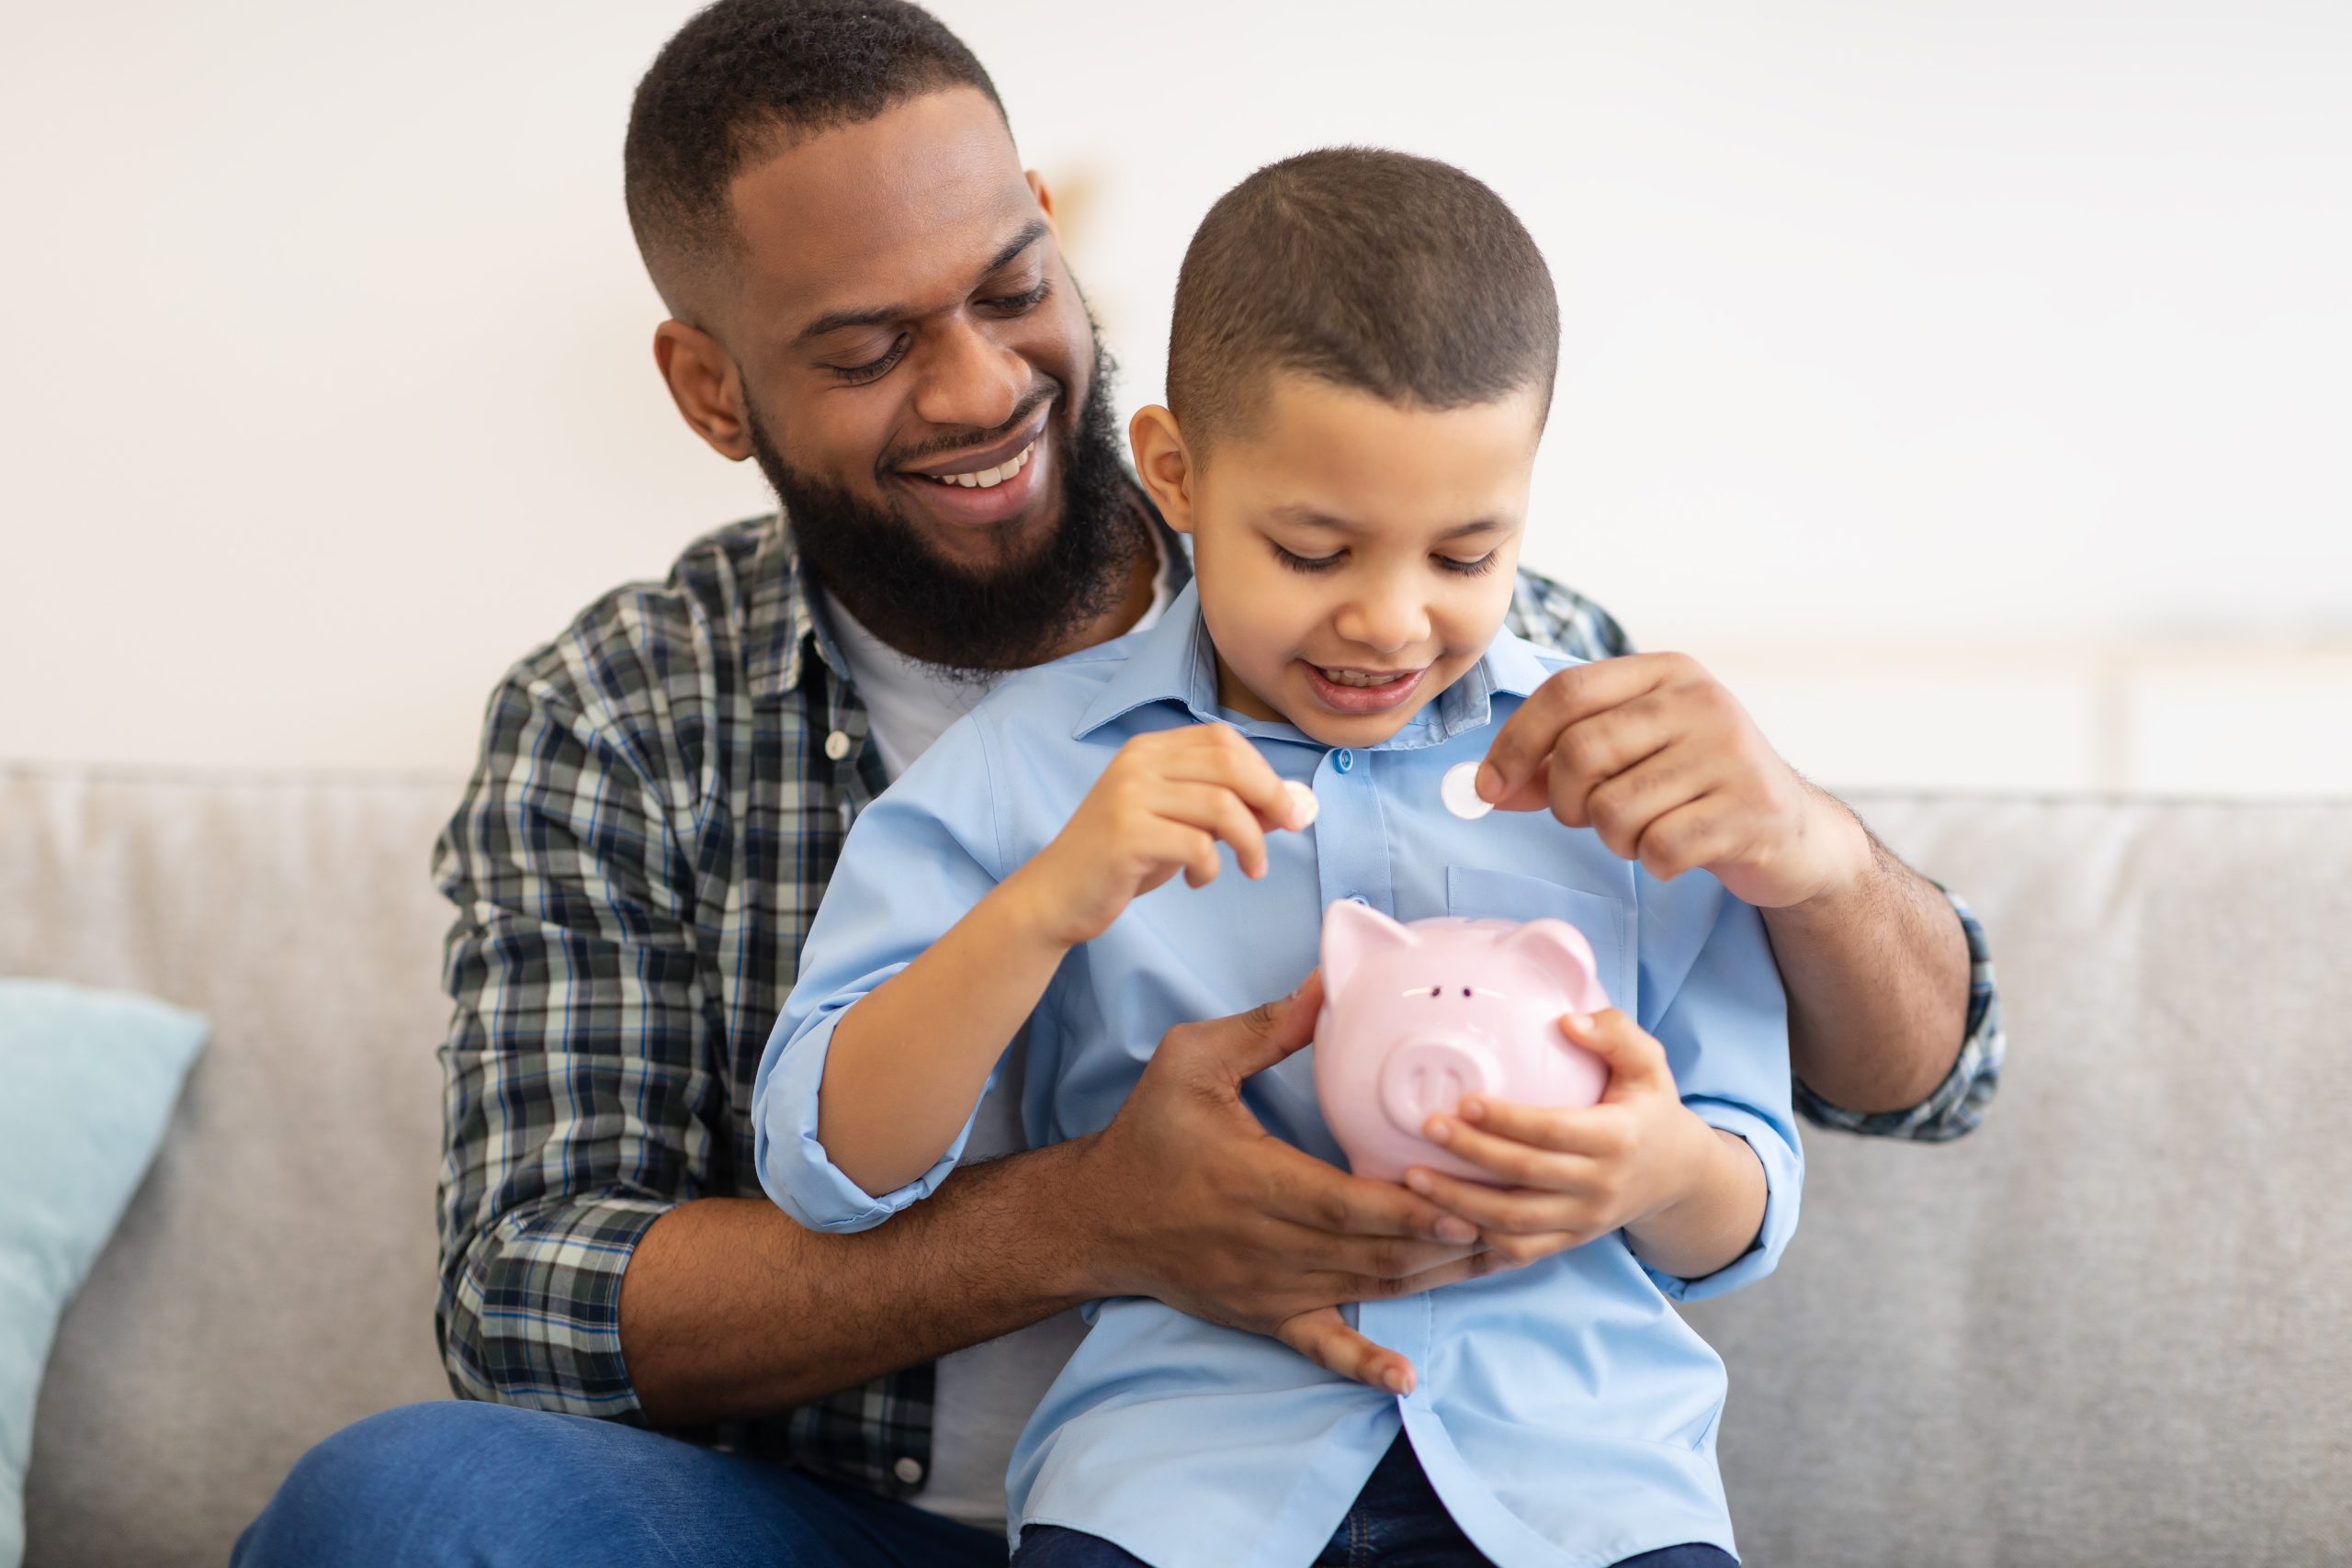 Dad And His Toddler Son Putting Coin In Piggybank Sitting On Couch At Home.